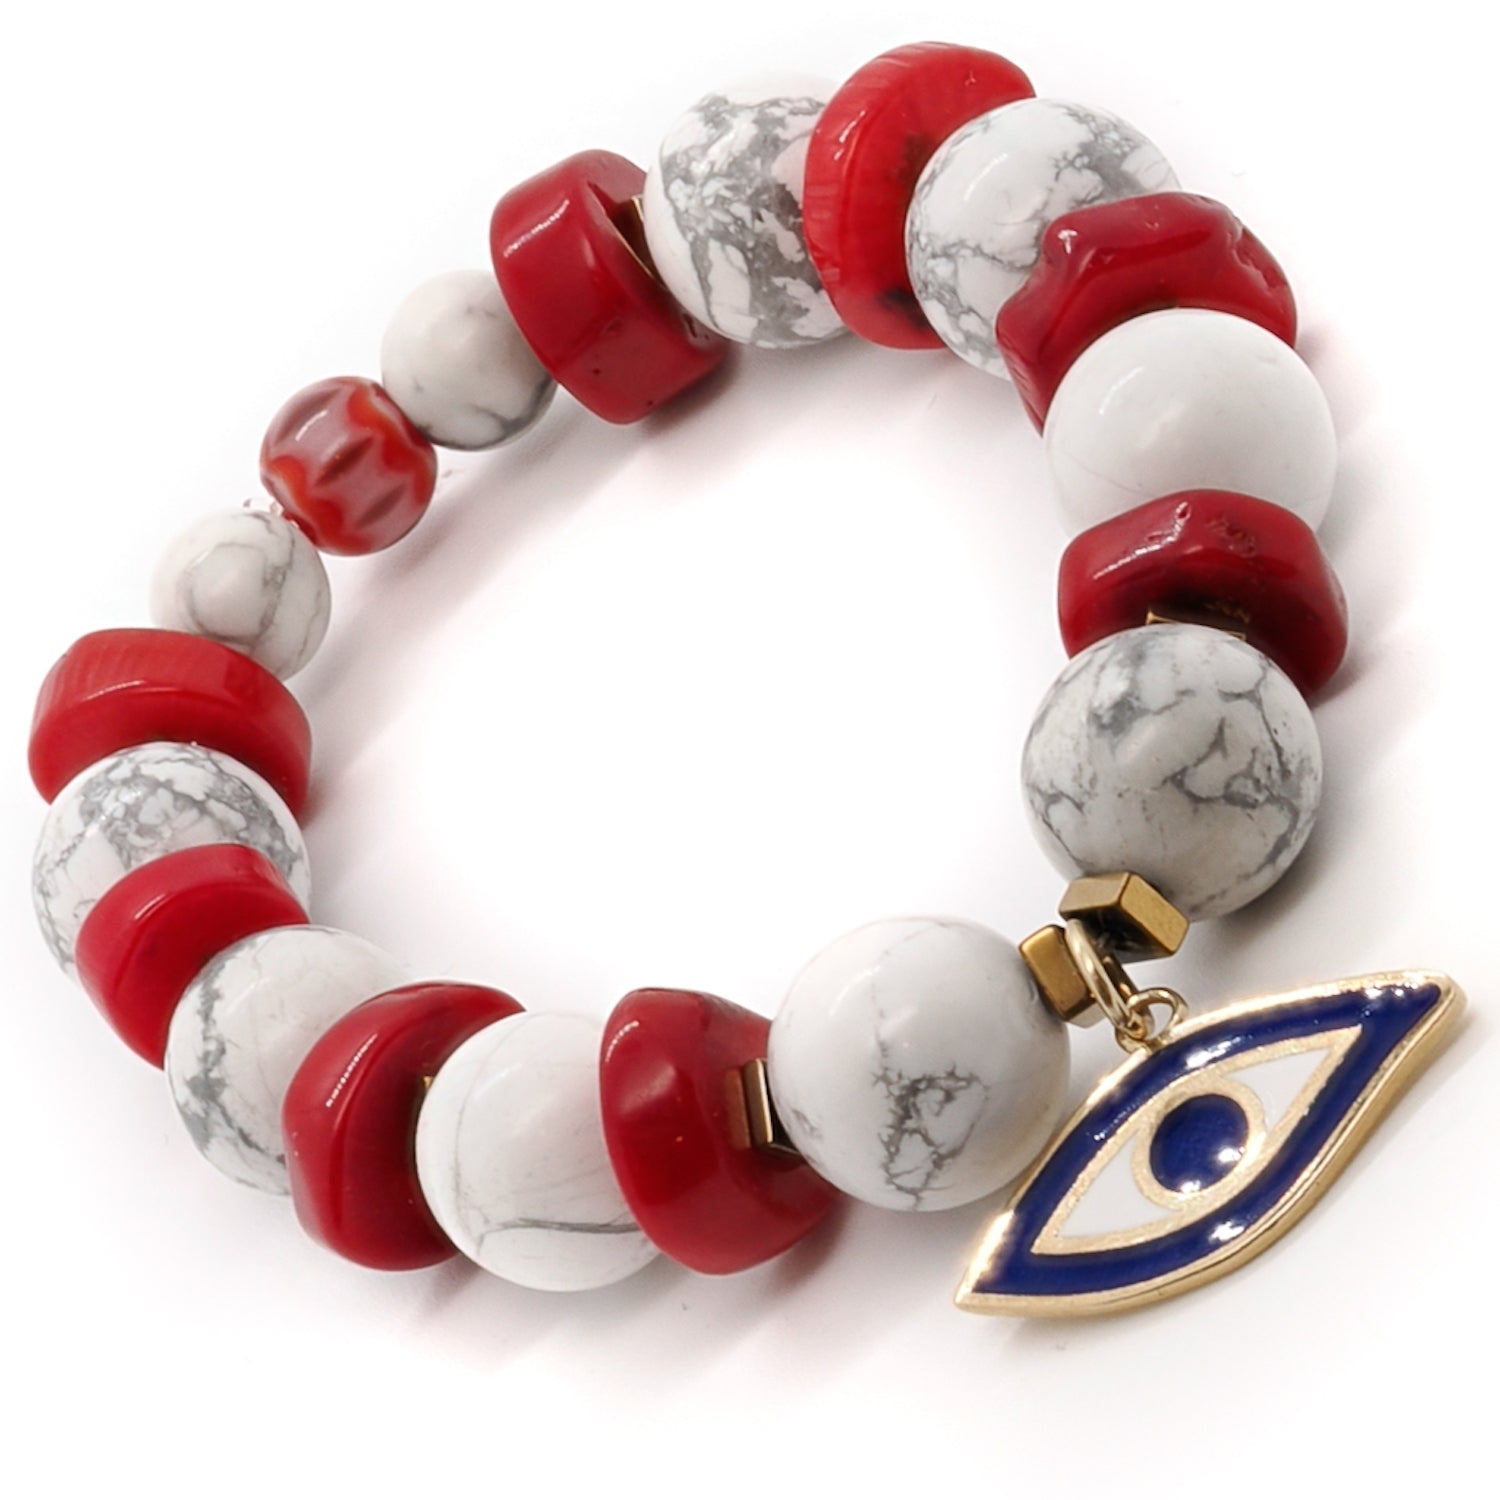 Discover joy and happiness with the Spiritual Beads Evil Eye Bracelet, adorned with red coral and gold hematite stones.